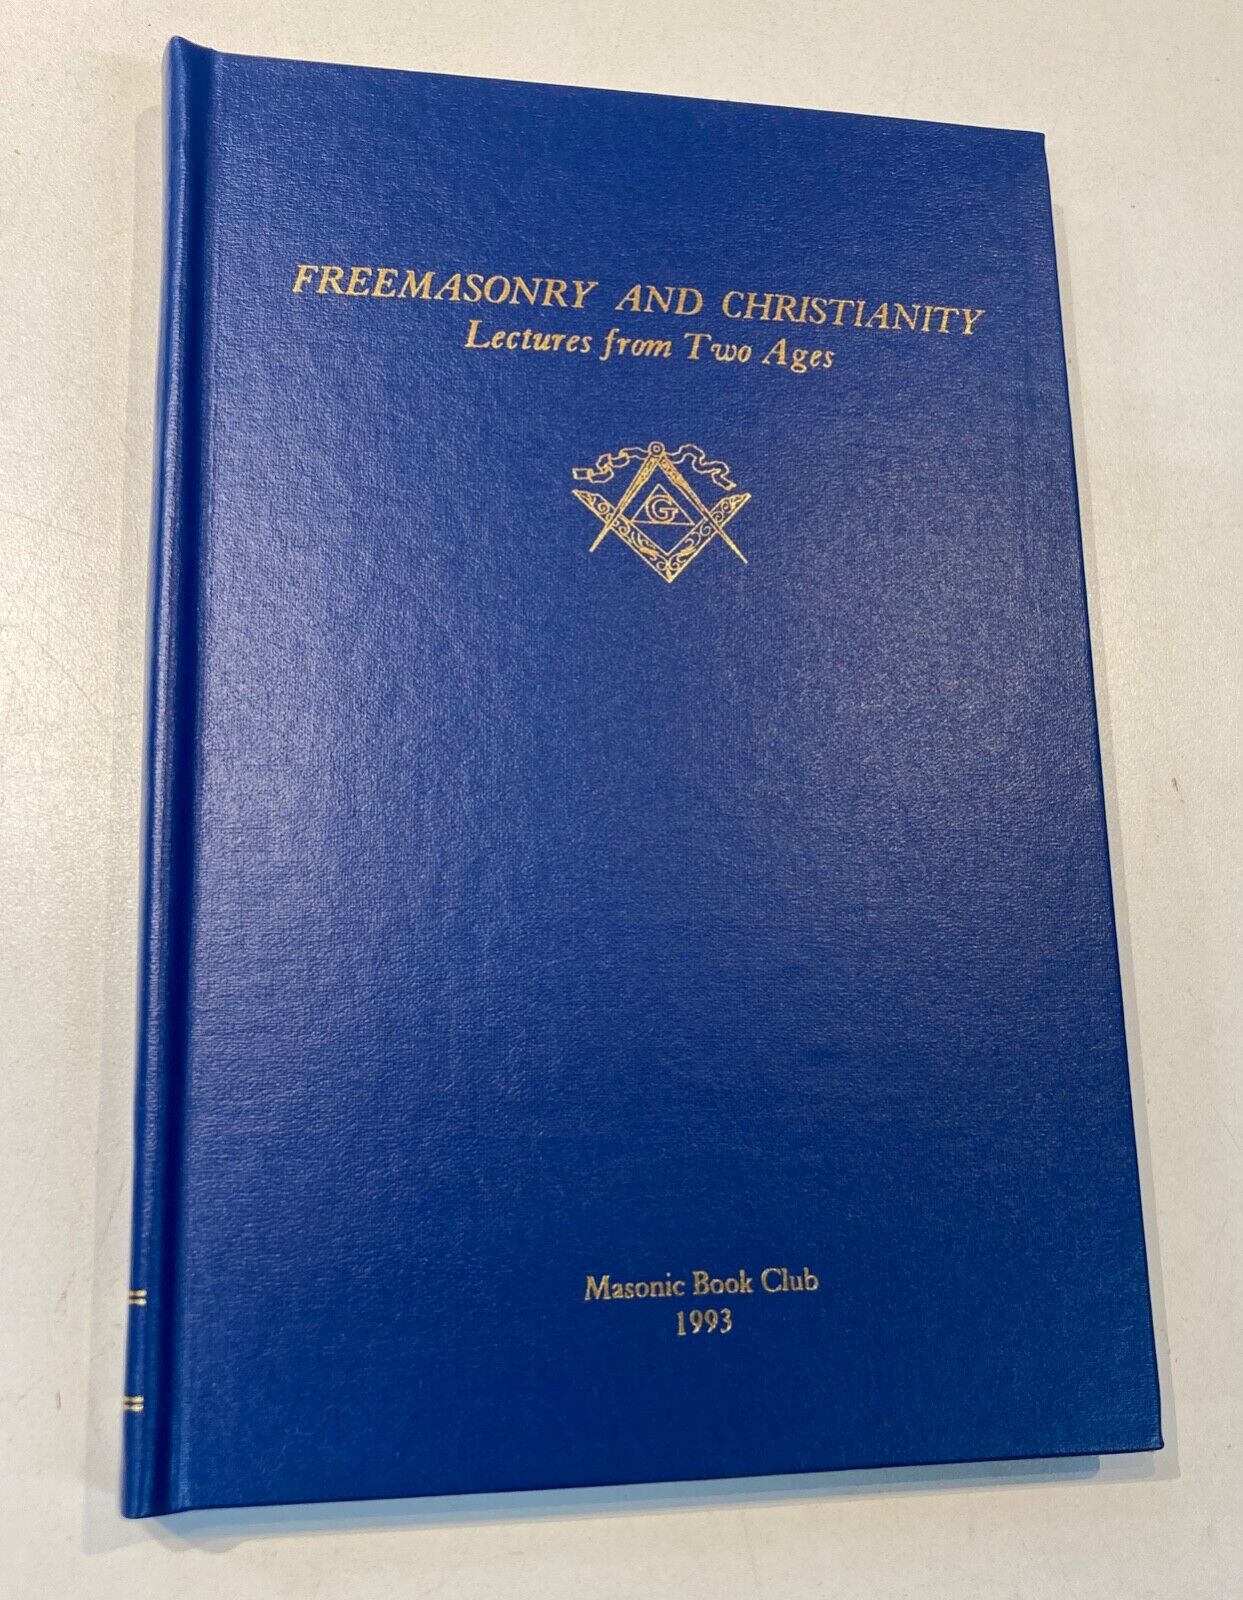 1993 reprint FREEMASONRY & CHRISTIANITY letters form two ages